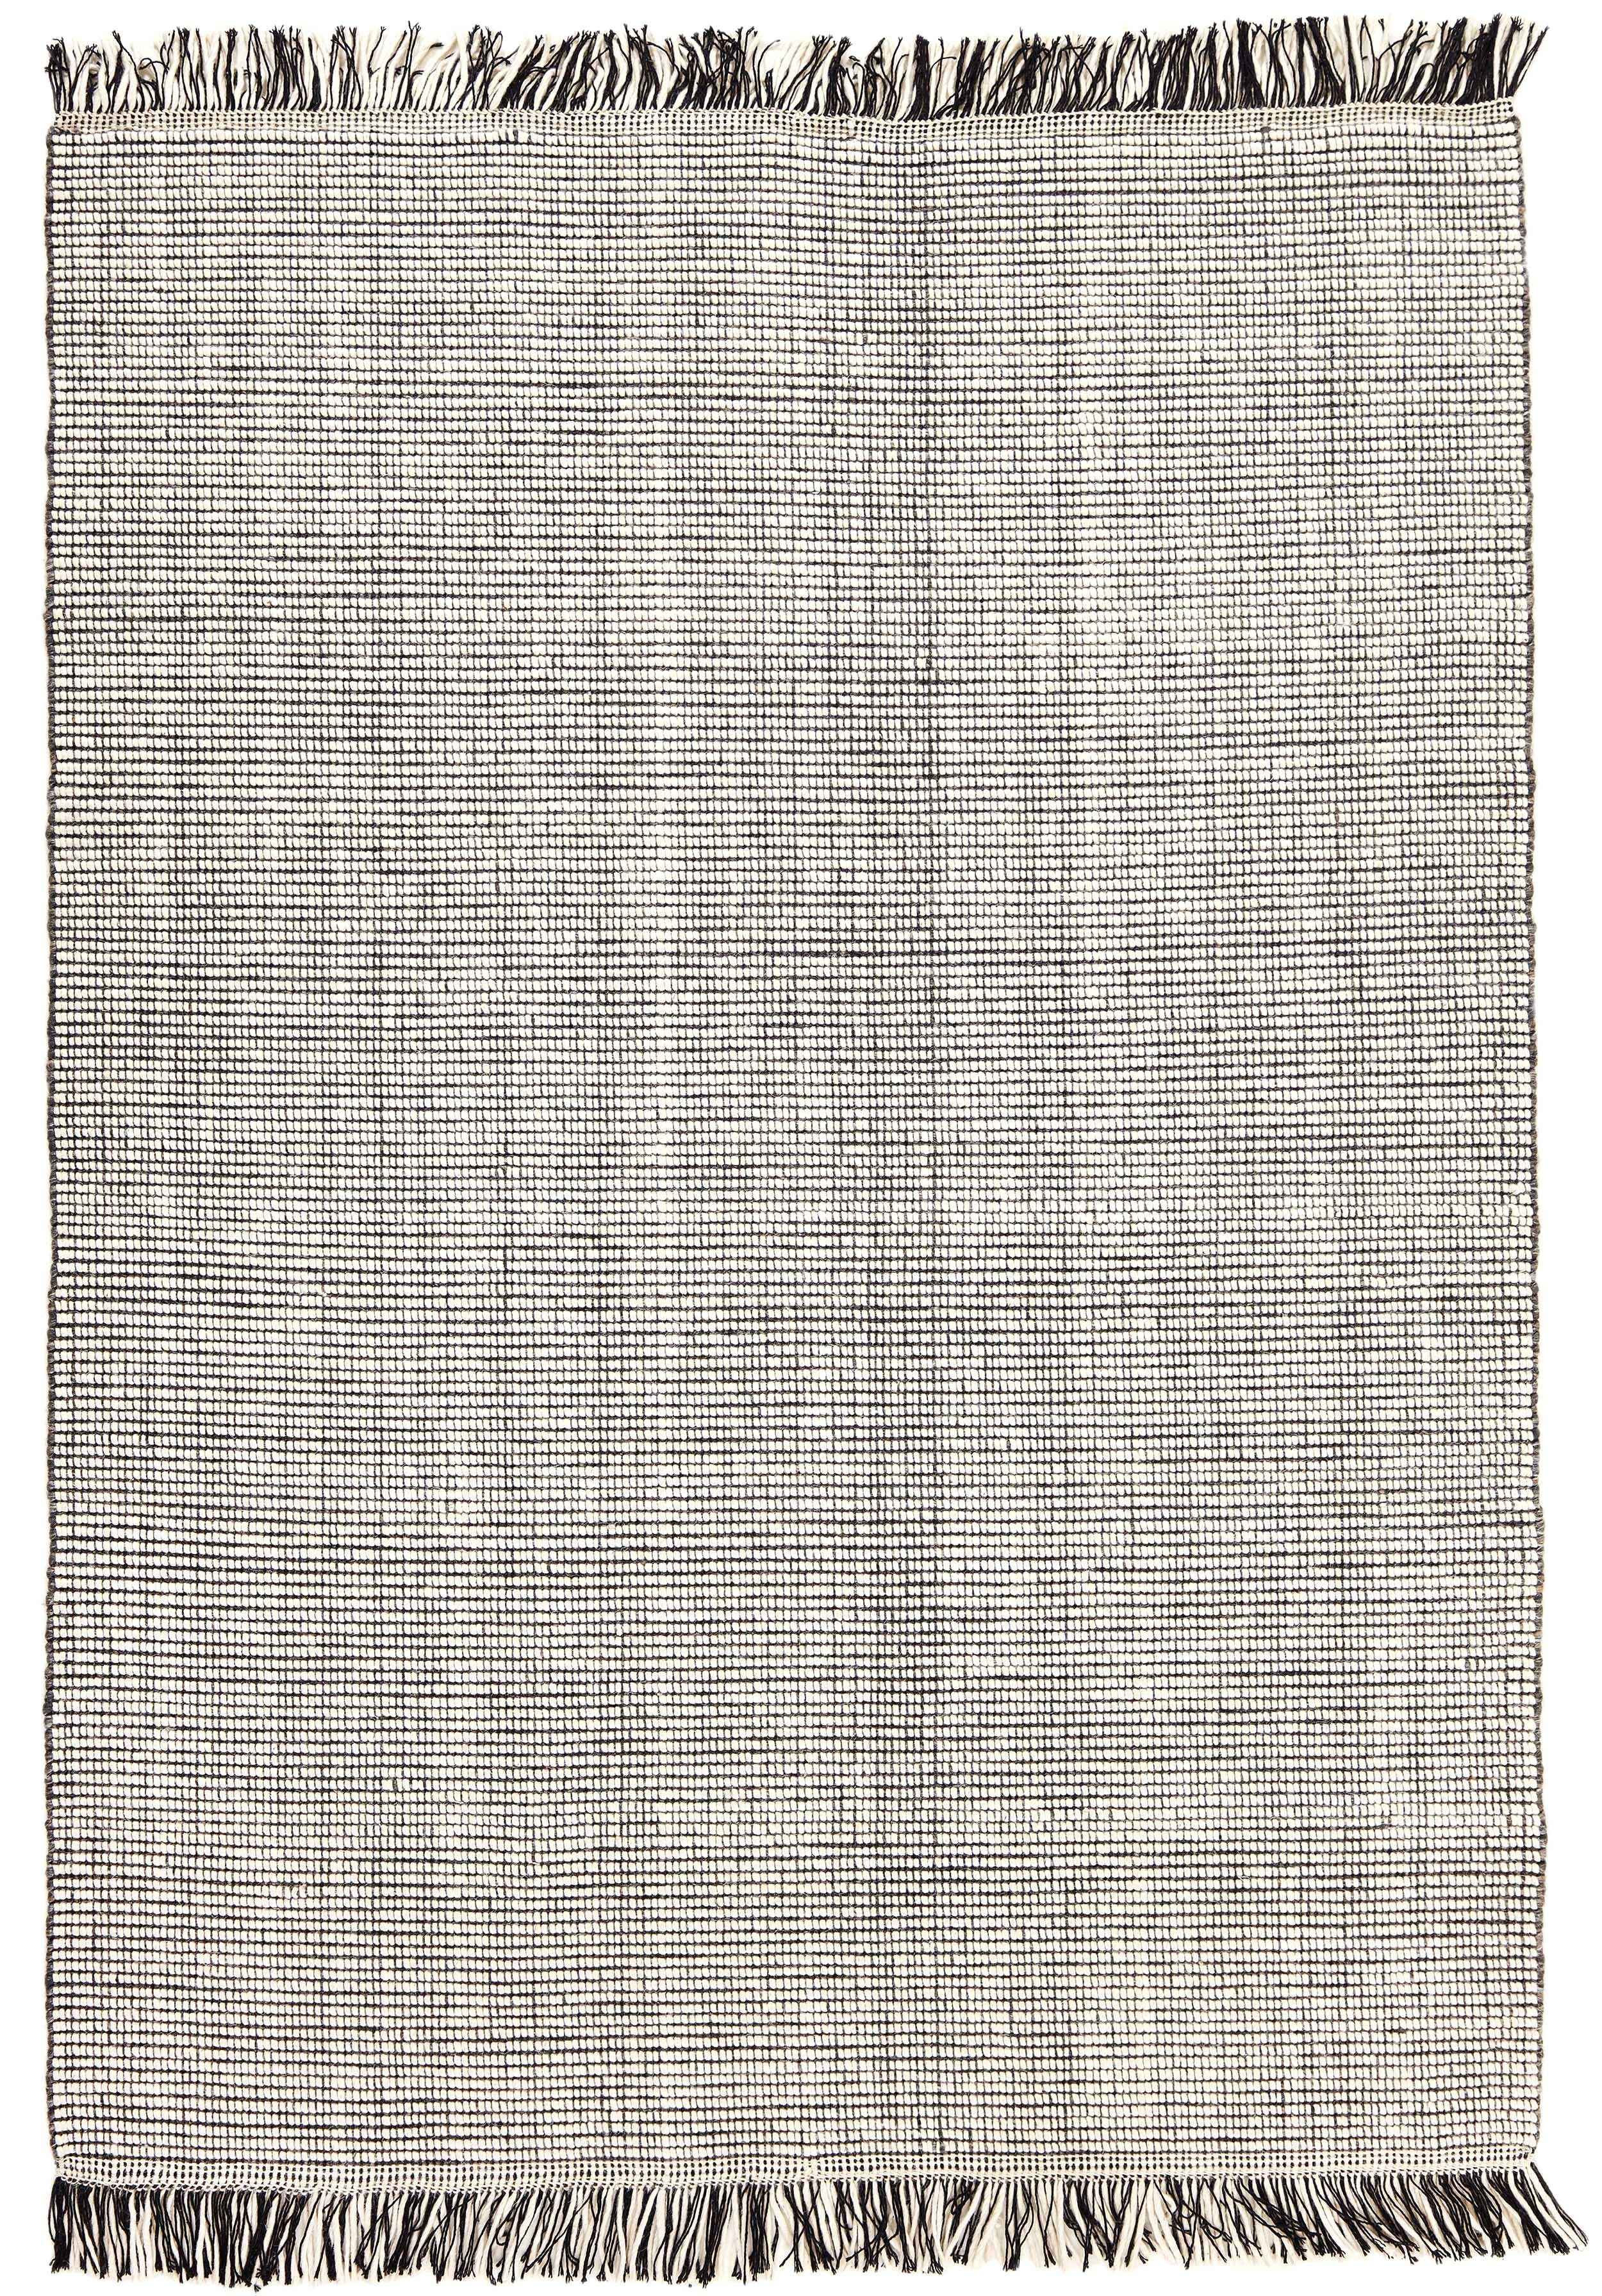 90x60 cm Indian Wool Multicolor Rug-5971A, Steel Grey White - Rugmaster